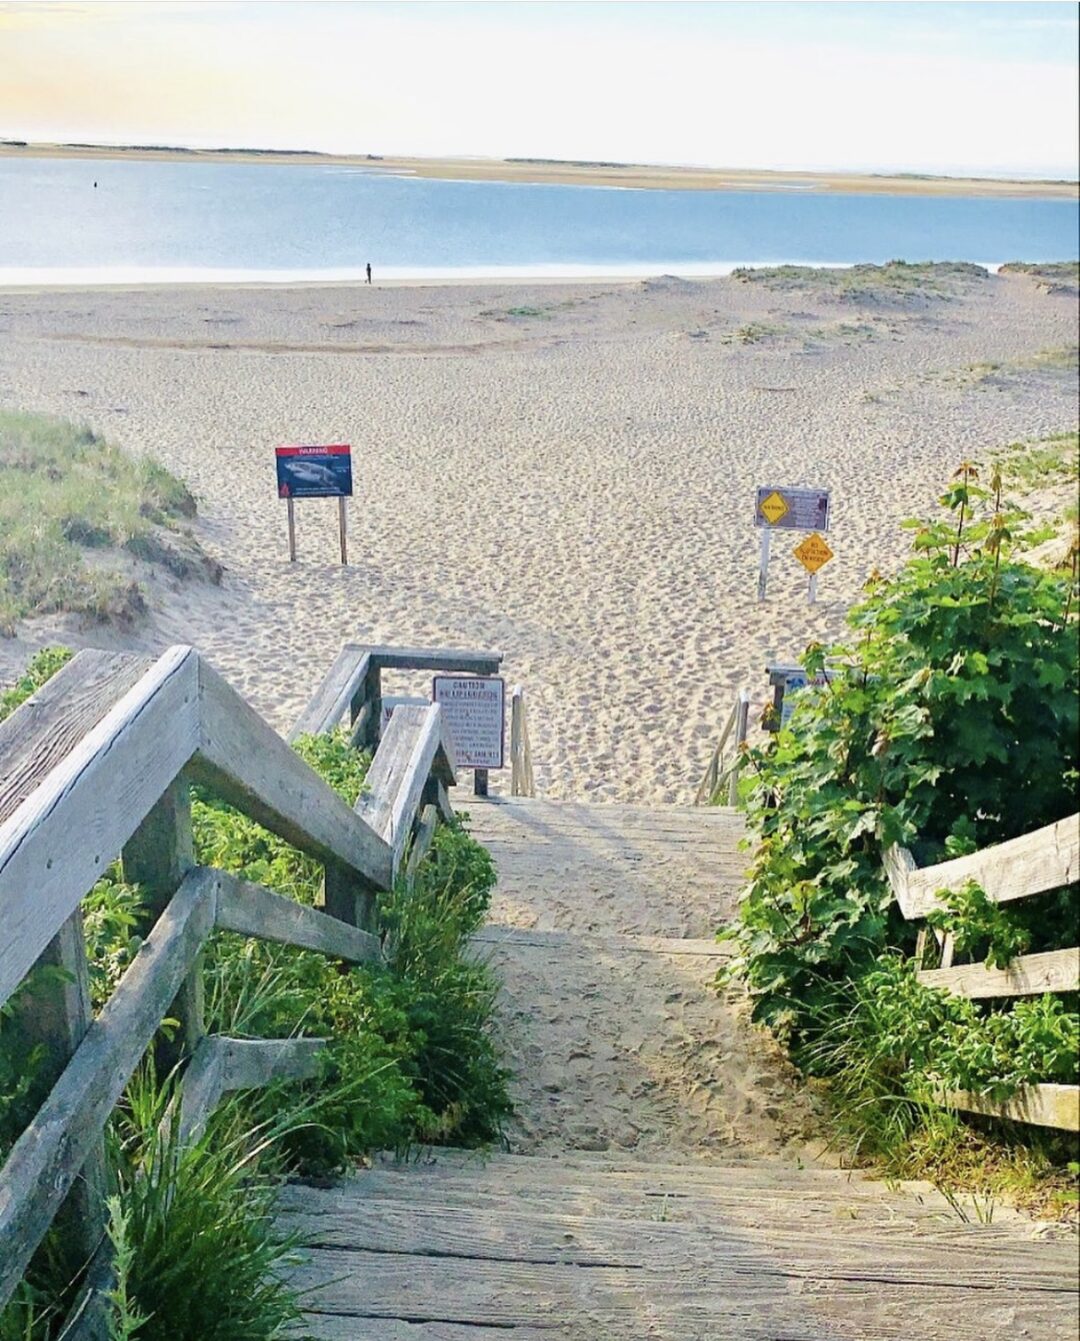 Cape Cod Beaches  Things To Do on Cape Cod